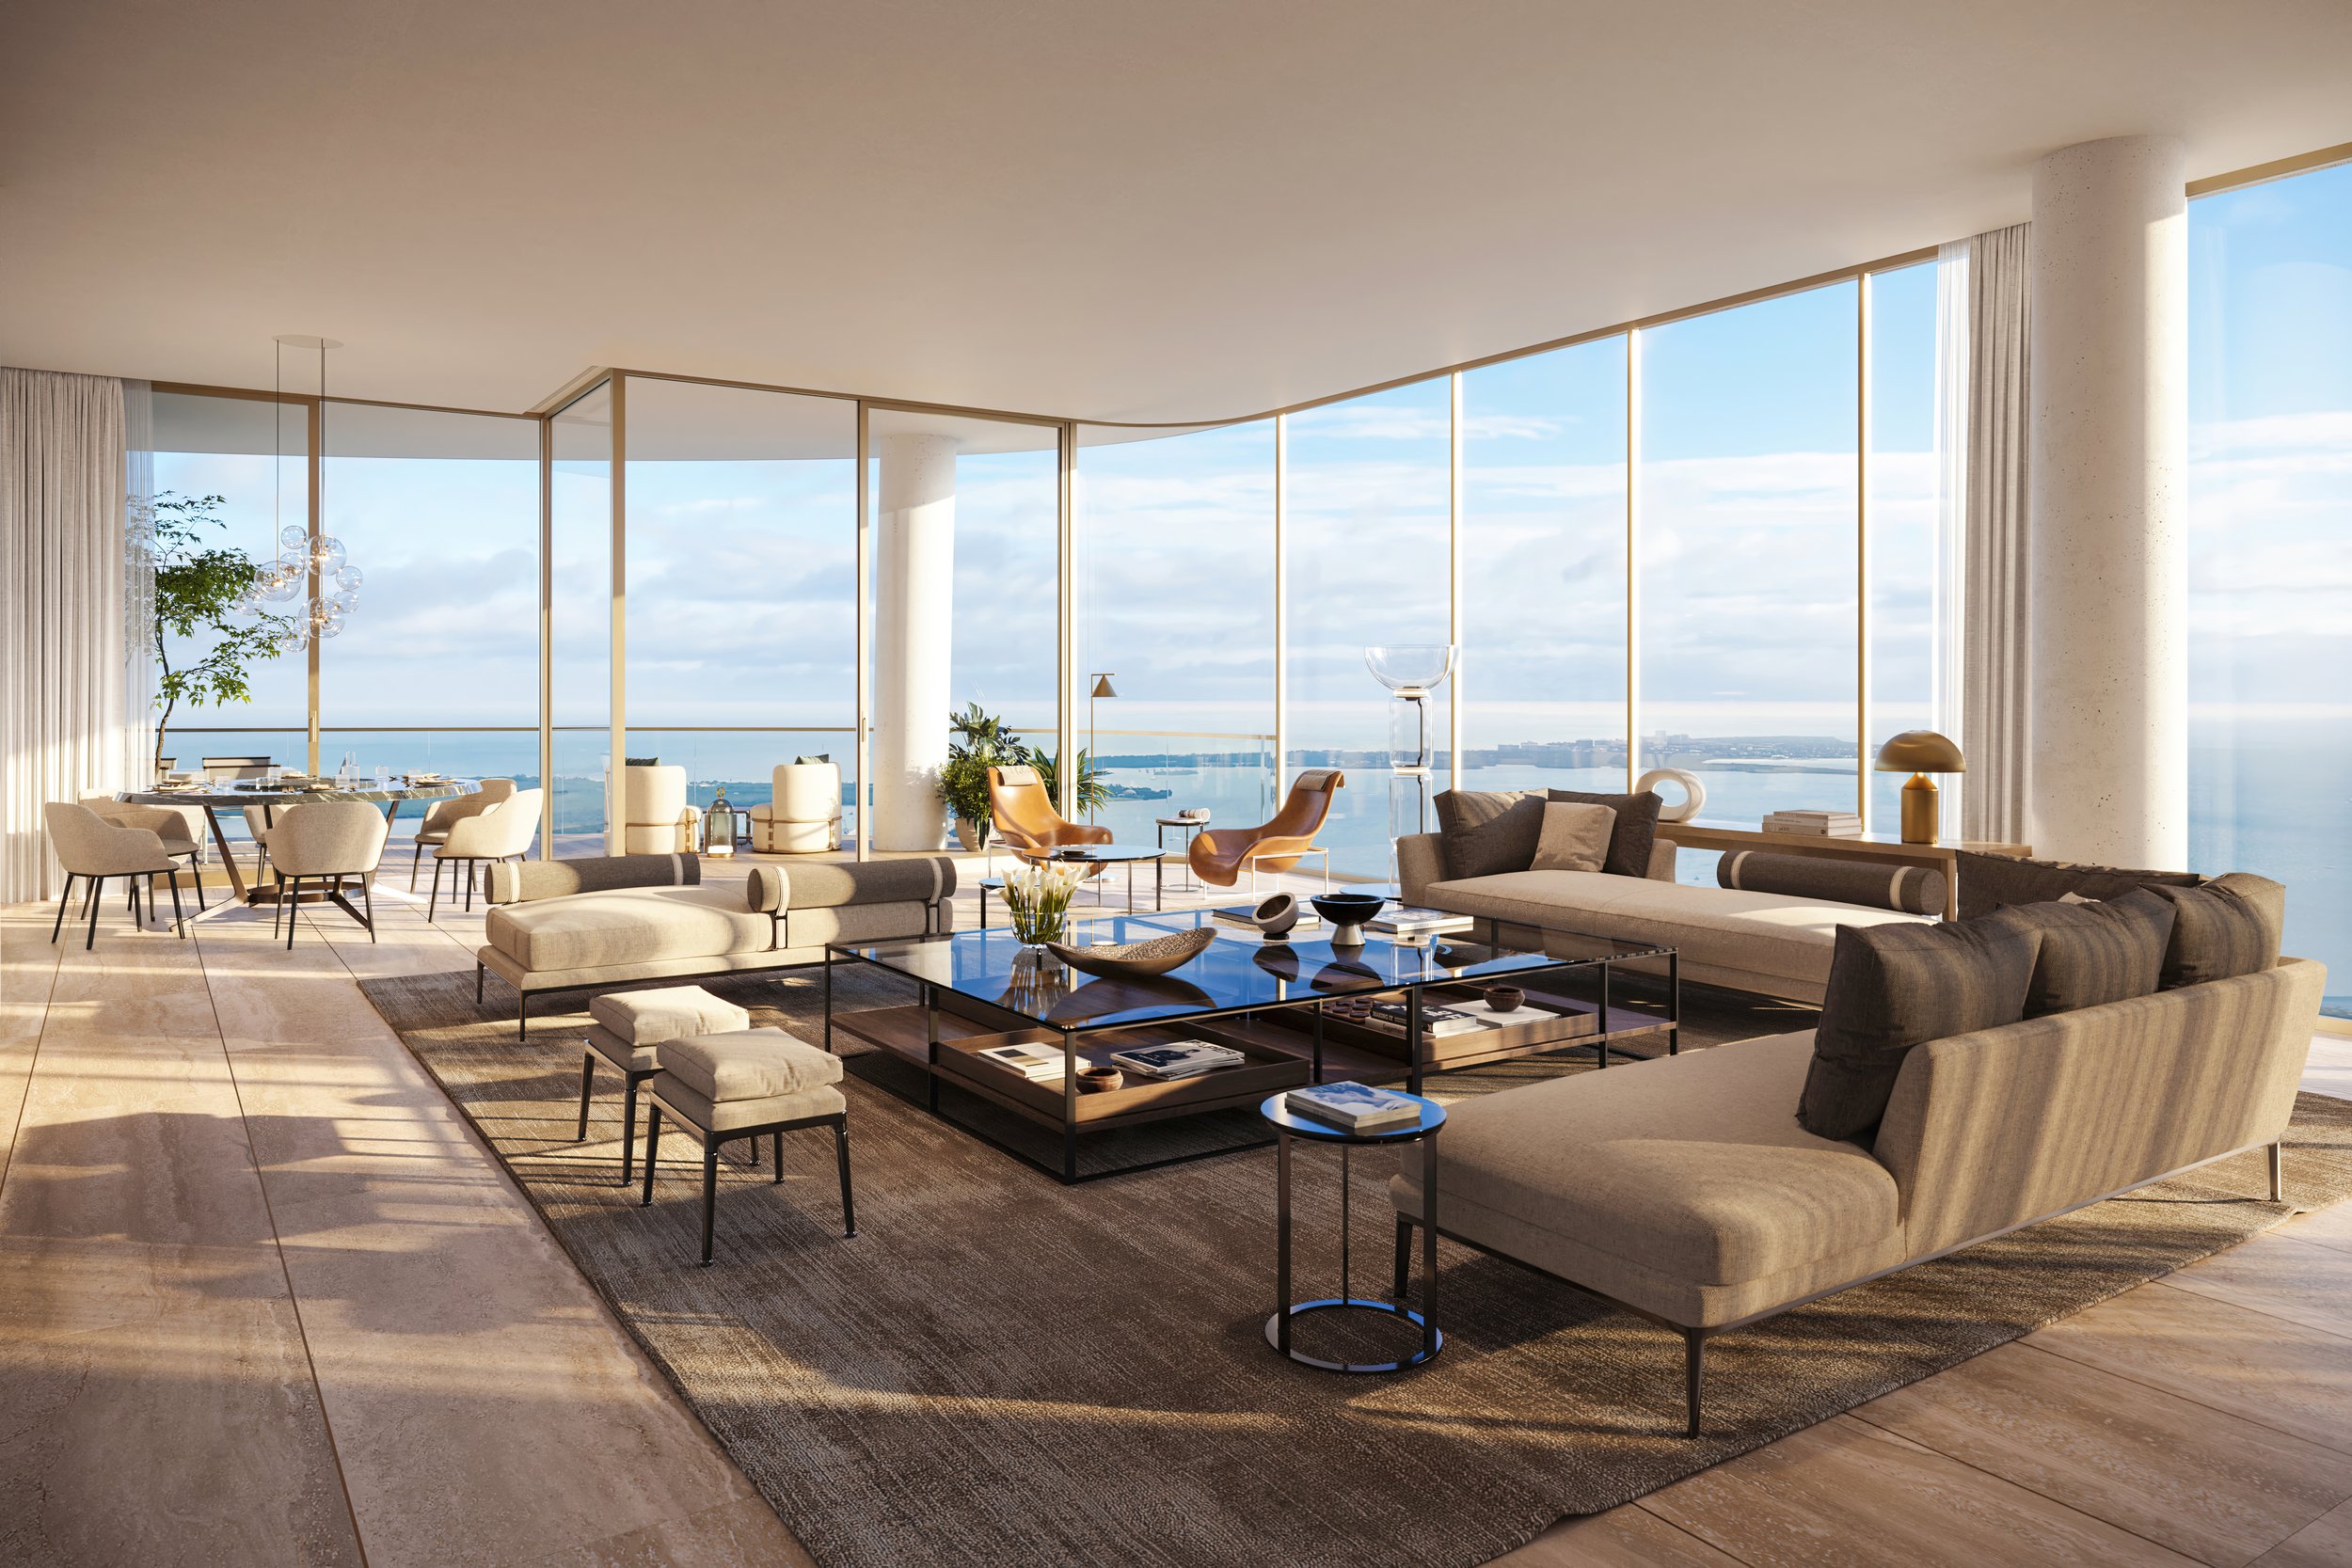 Unit G Living Room Day - The Residences at 1428 Brickell.jpg